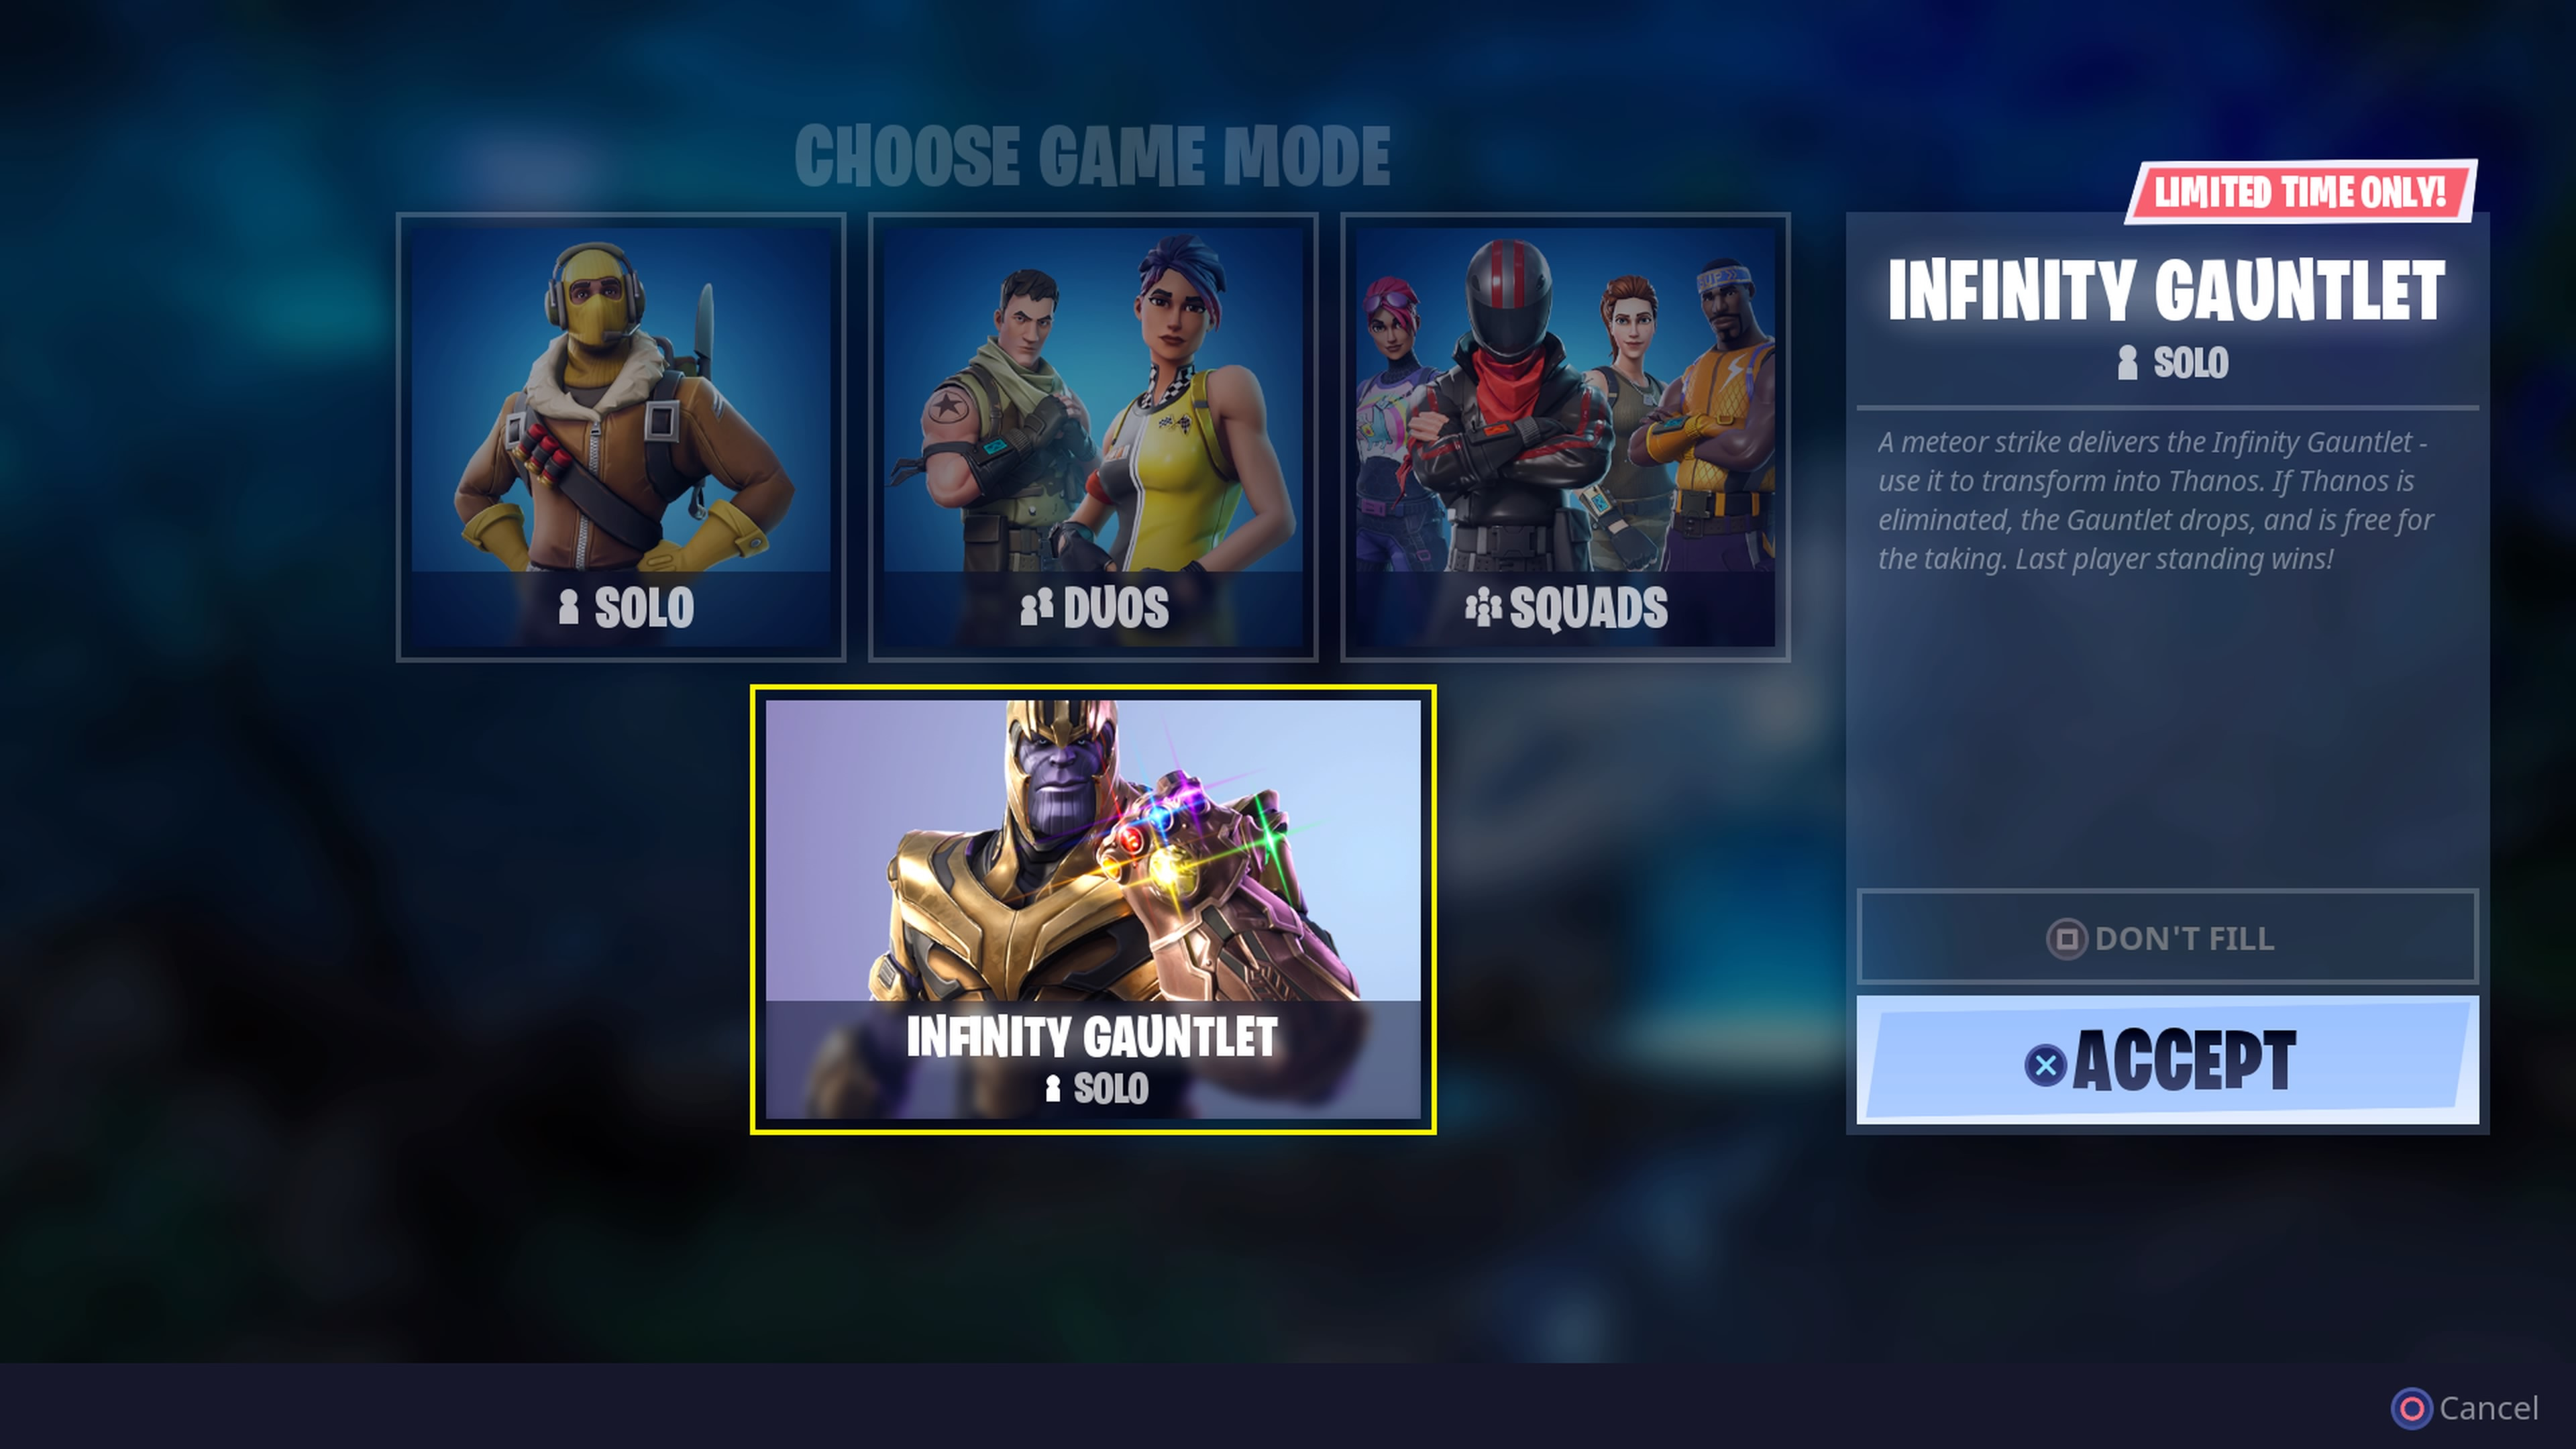 Rewards For The Solo Gauntlet In Fortnite Fortnite How The Thanos Infinity Gauntlet Event Works Guide Push Square